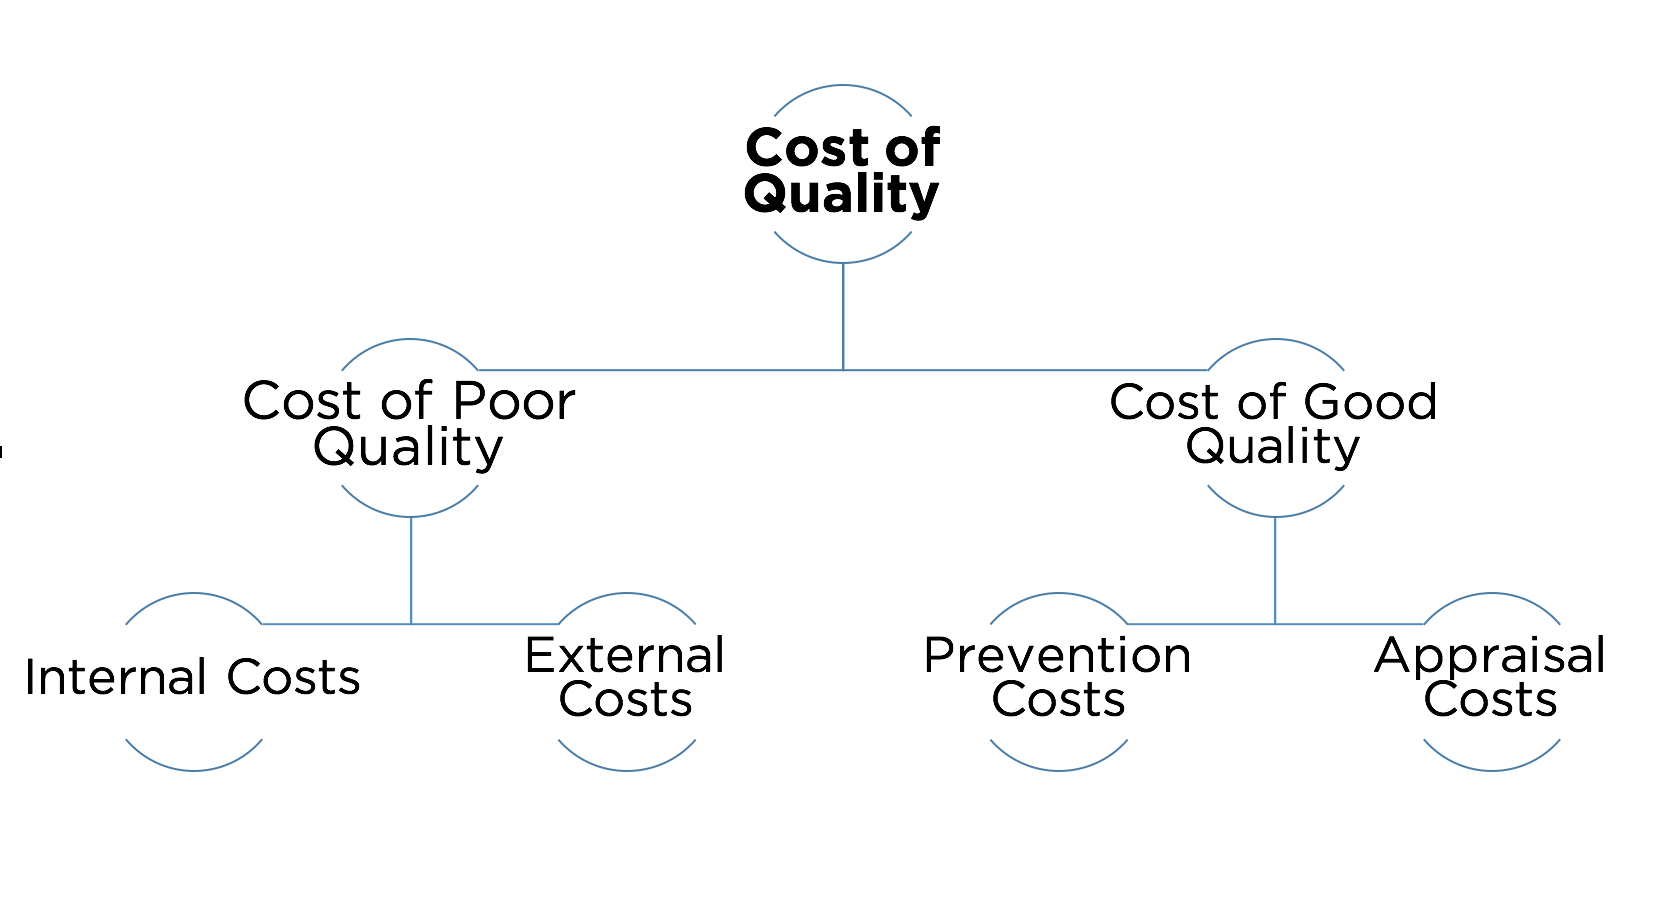 Cost of Quality is divided into cost fo poor quality and cost of good quality